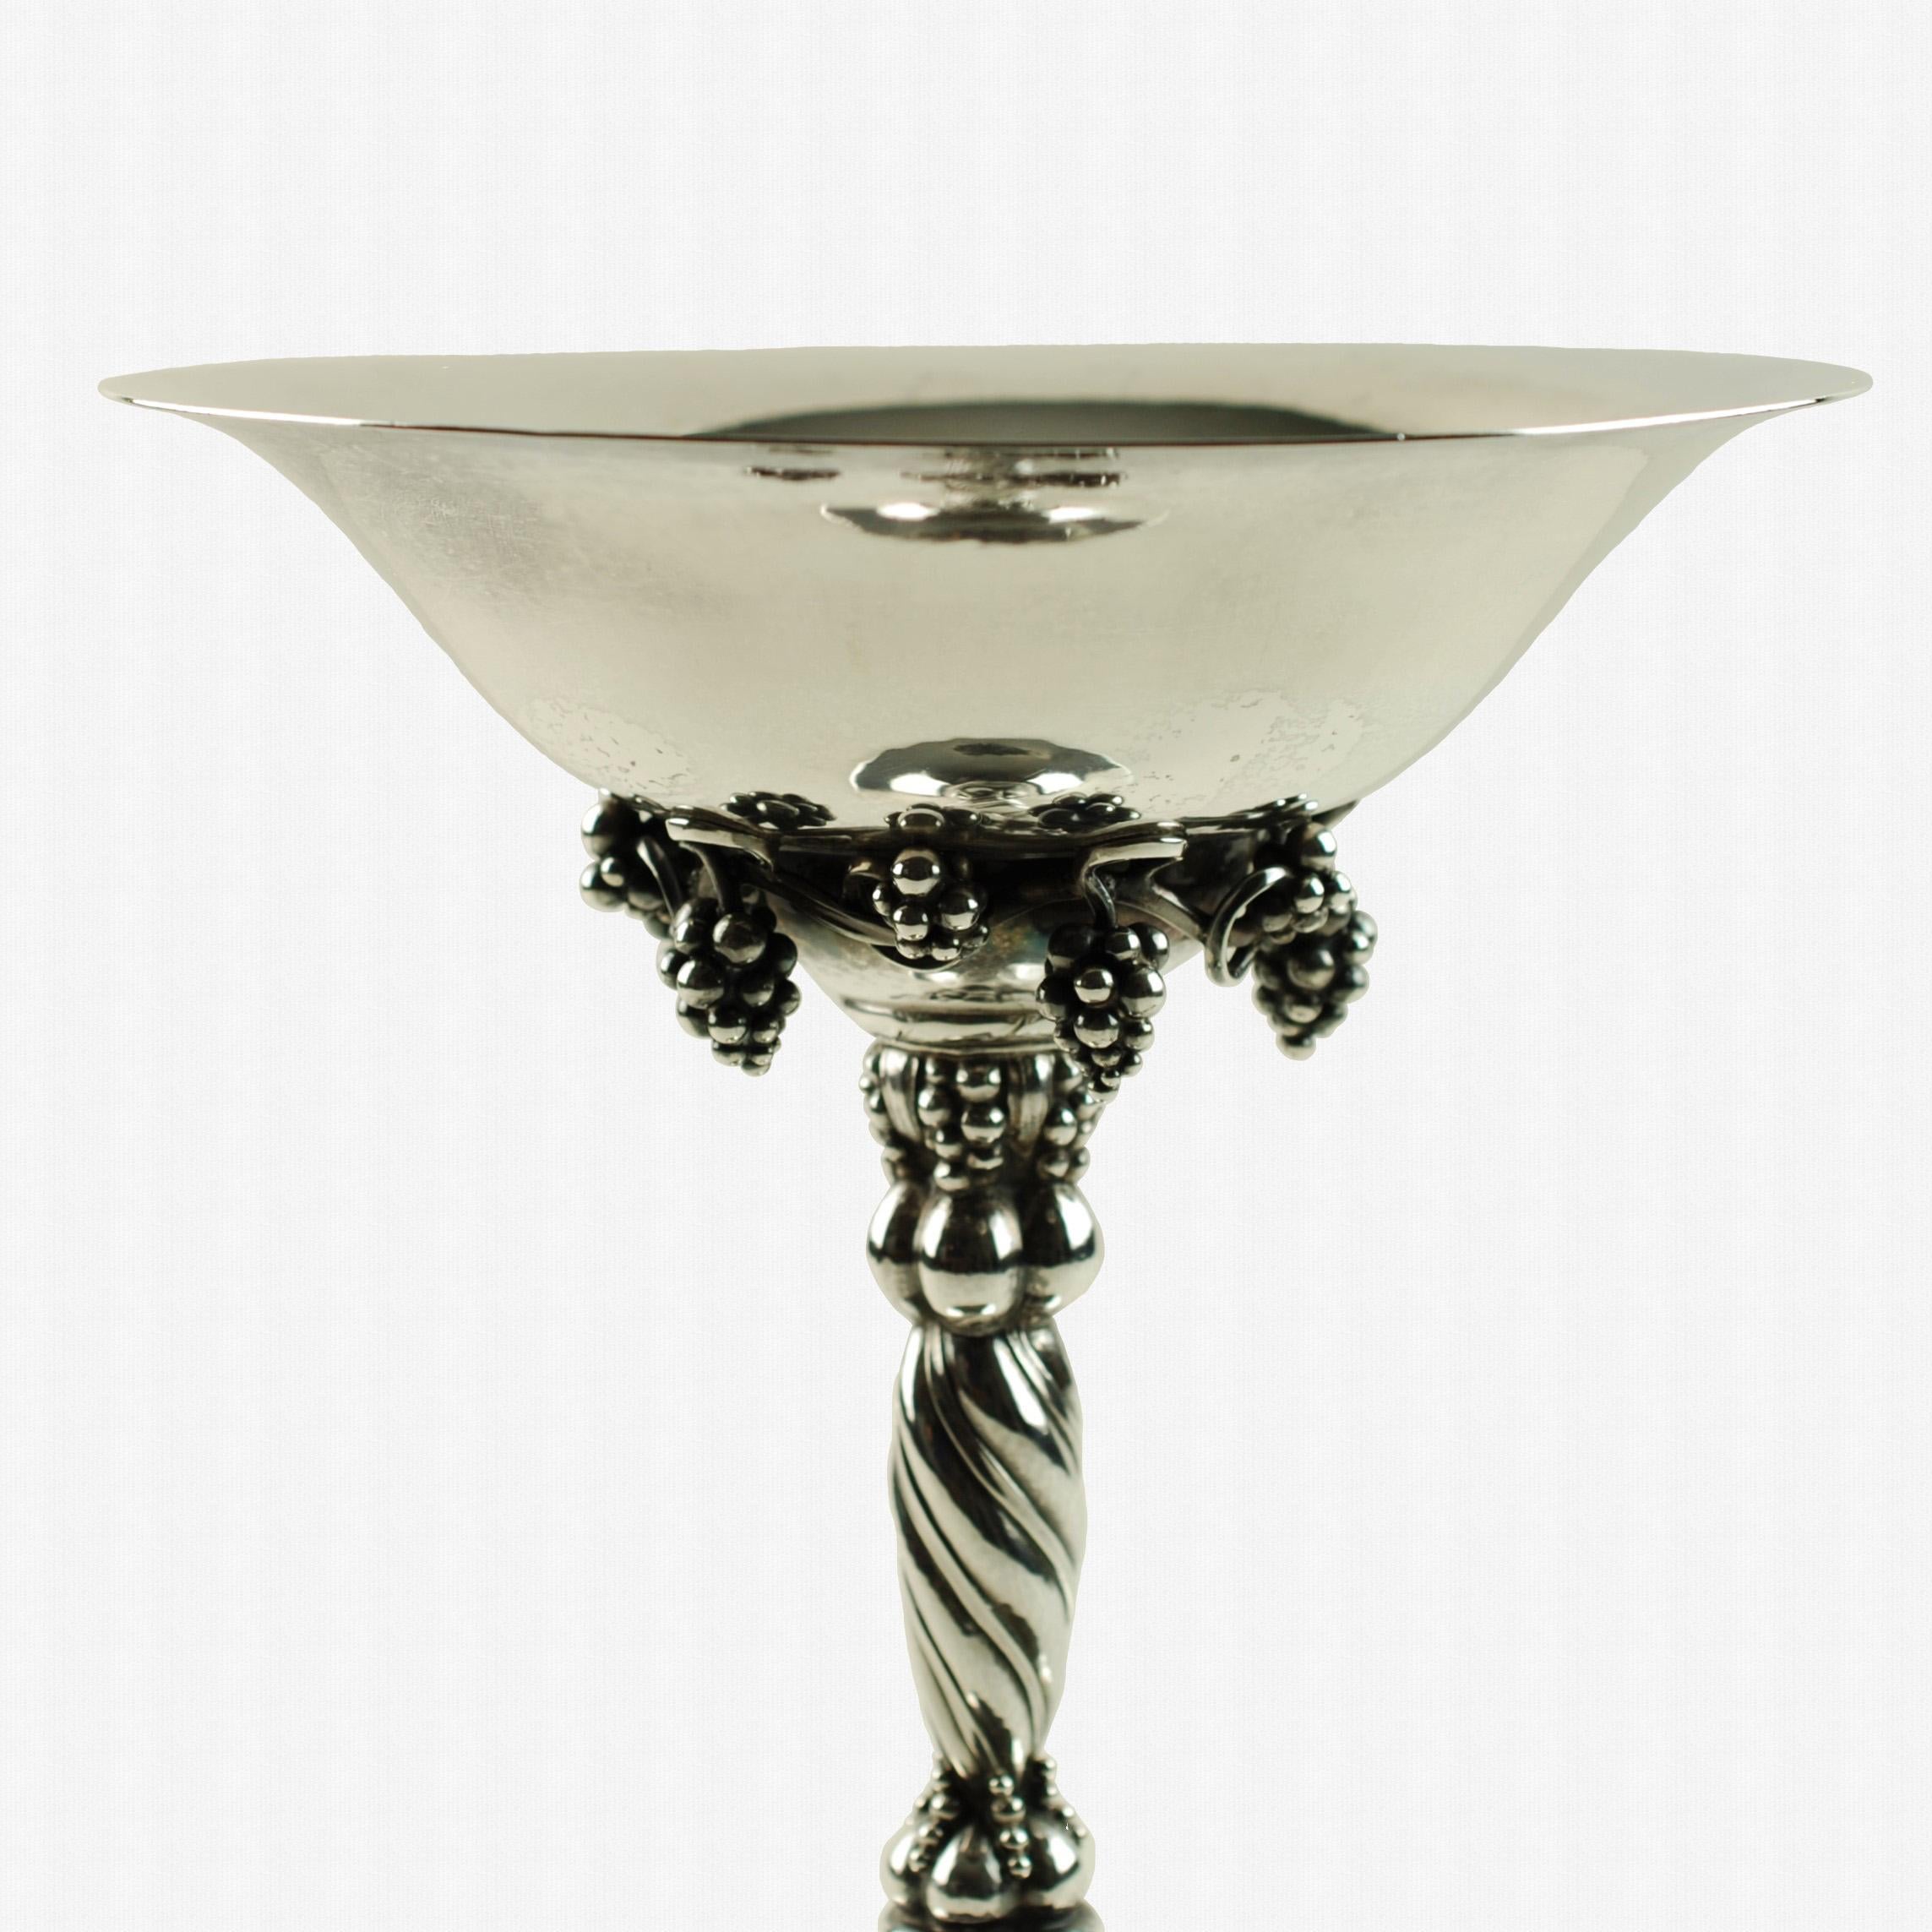 Vintage Georg Jensen sterling silver tazza compote with grape motif. This fabulous Georg Jensen sterling silver tazza features Jensen's iconic grape motif, a celebrated range of pieces which were inspired by the Art Nouveau aesthetic coupled with